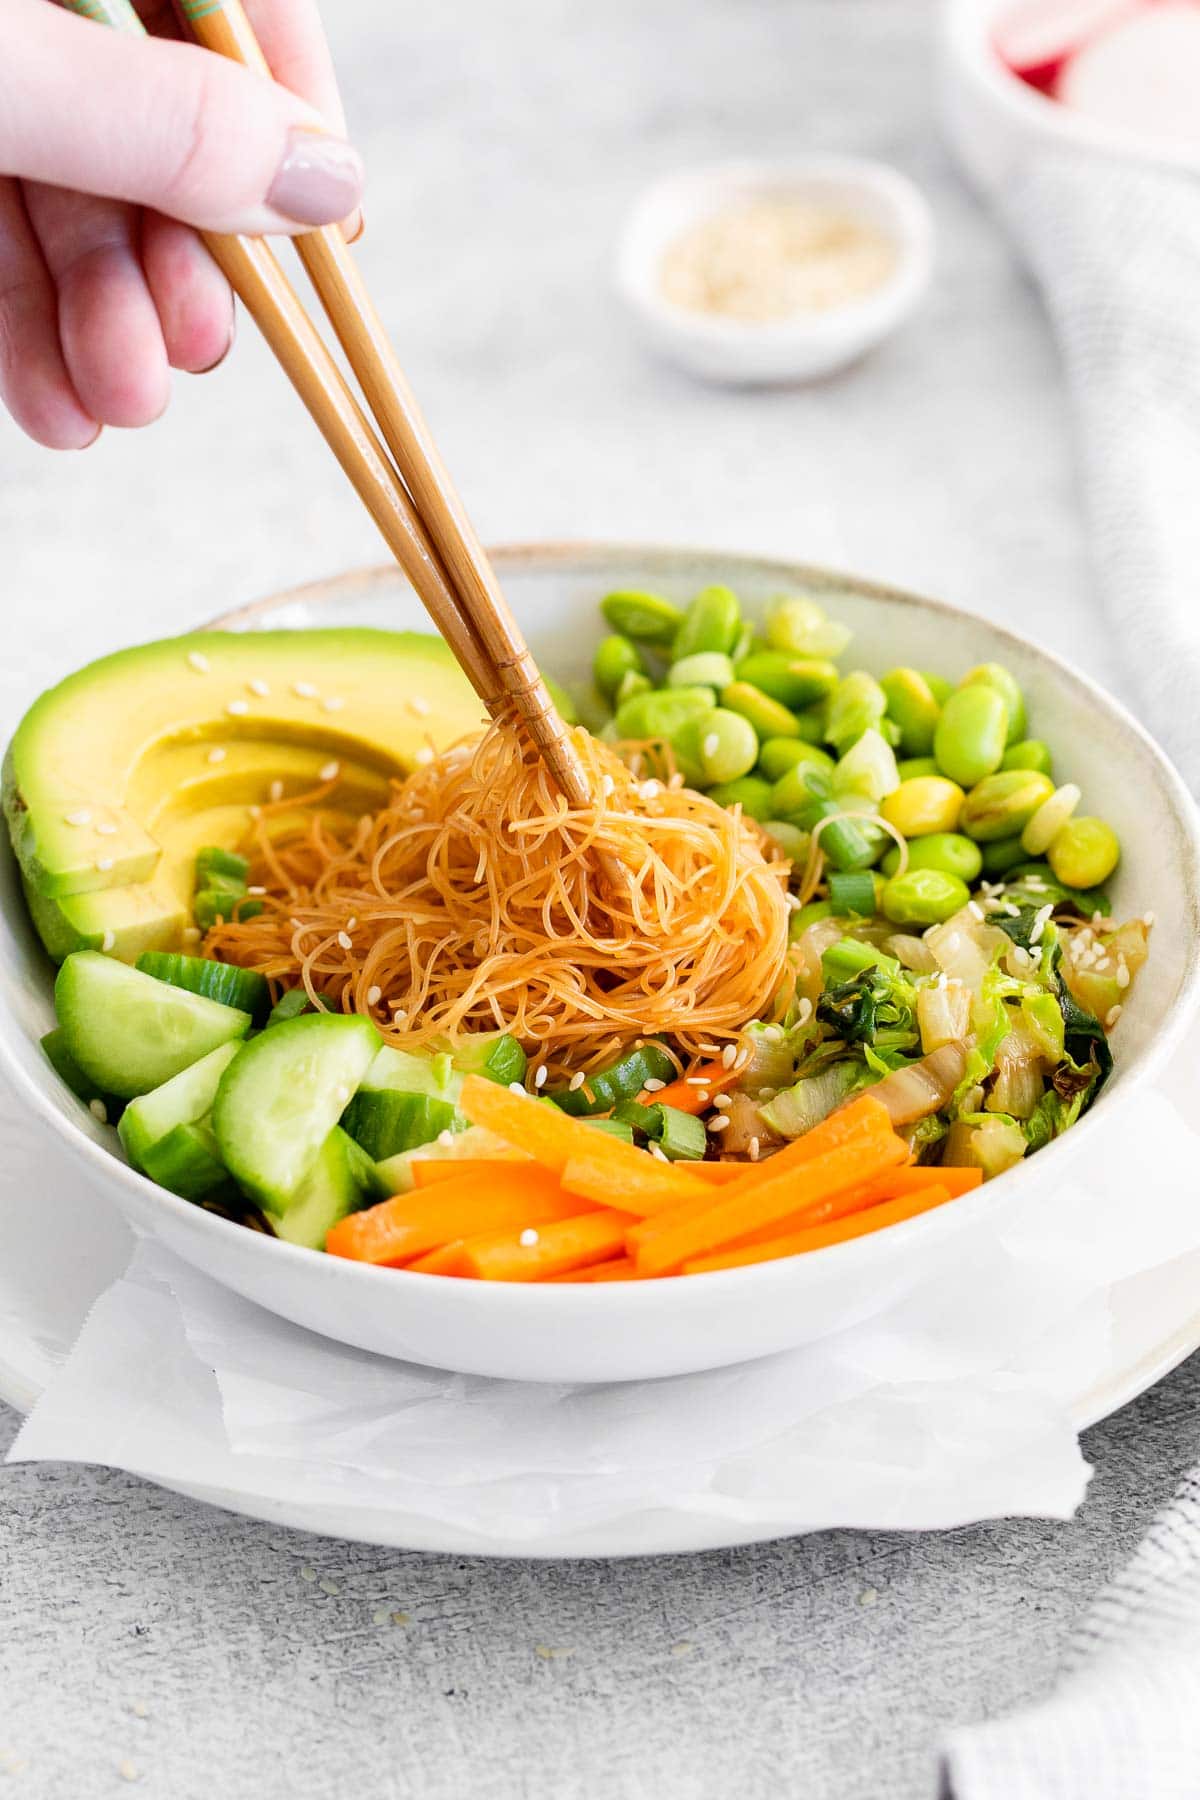 chopsticks picking up rice noodles from a white bowl full of sliced carrots, cucumbers, cabbage and avocado